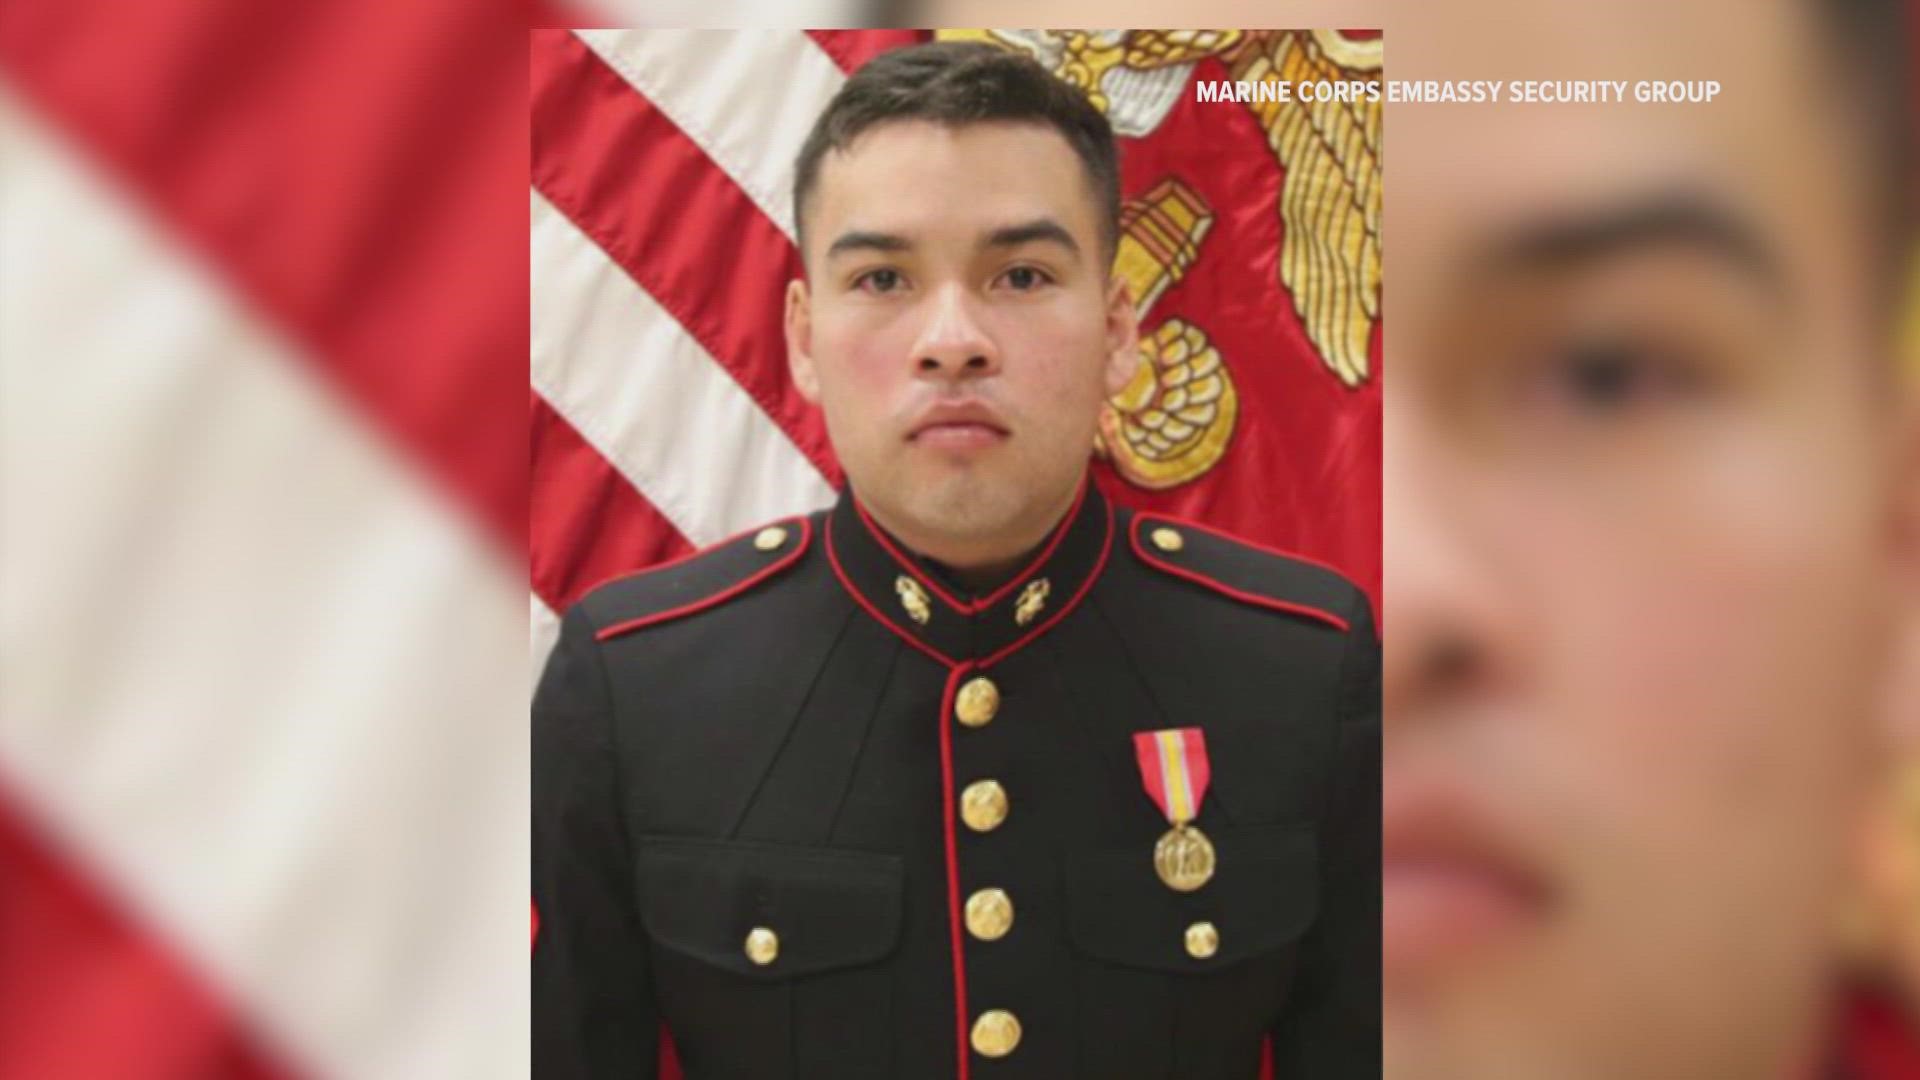 A cause of death has not been released, but officials with Marine Corps Embassy Security Group say an investigation is underway.